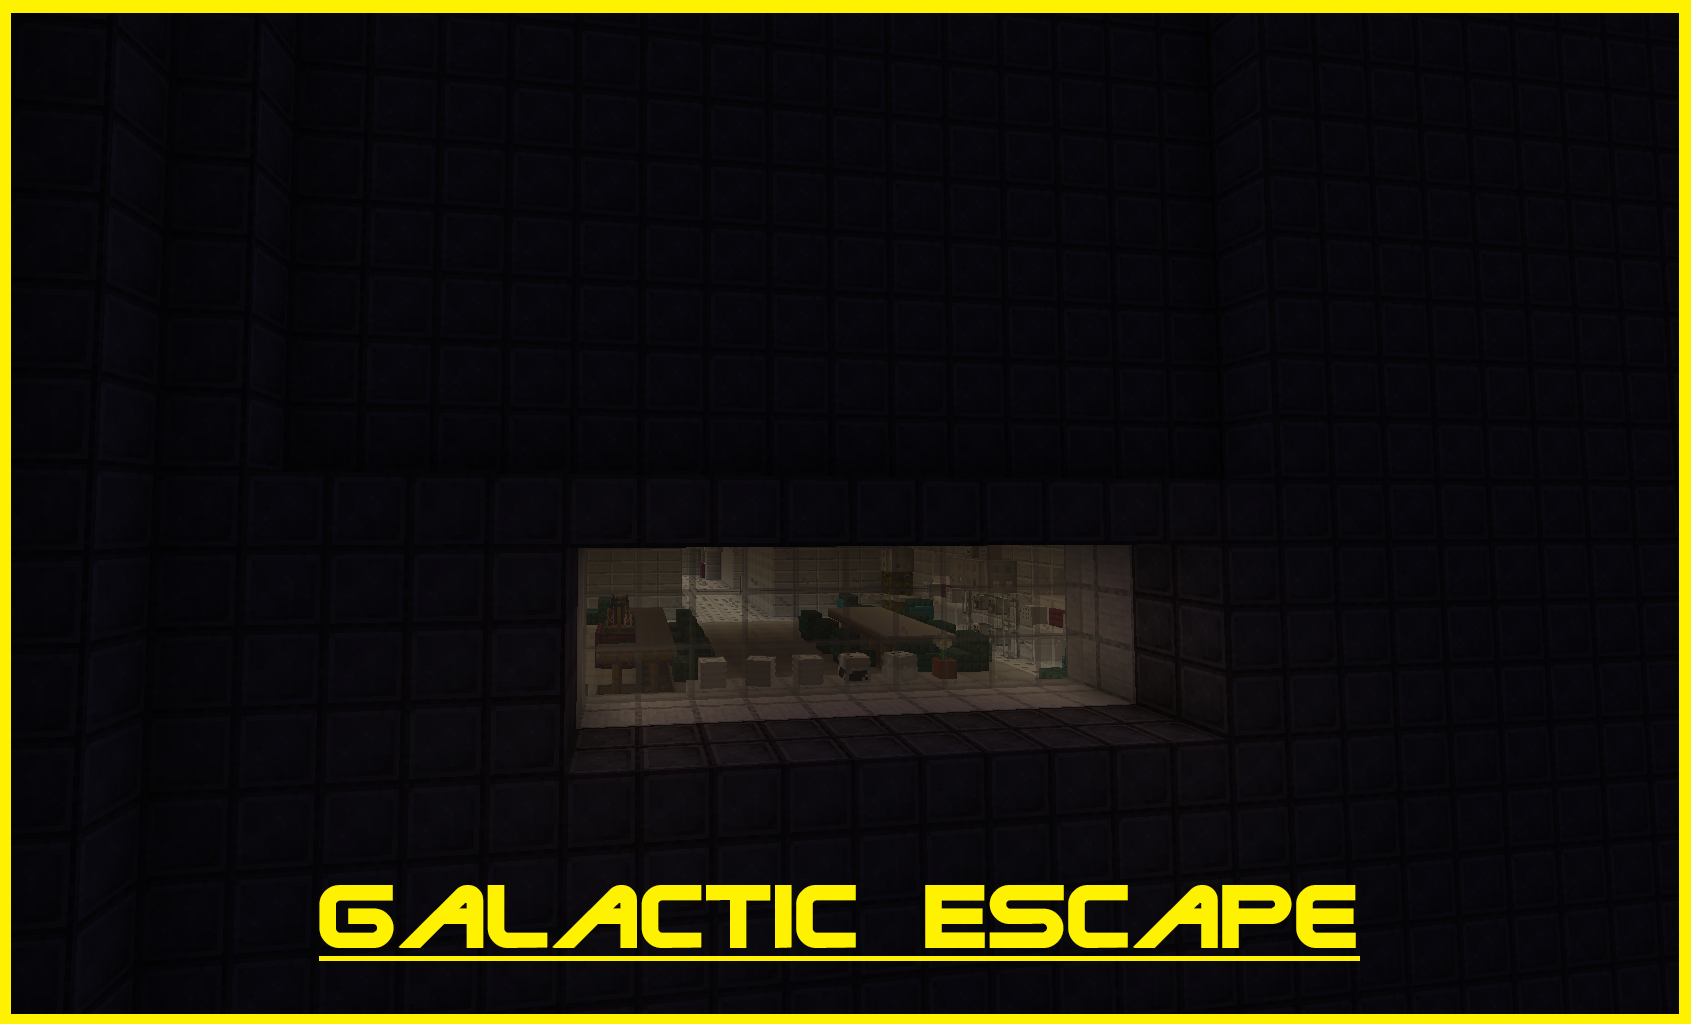 Download Galactic Escape for Minecraft 1.16.5